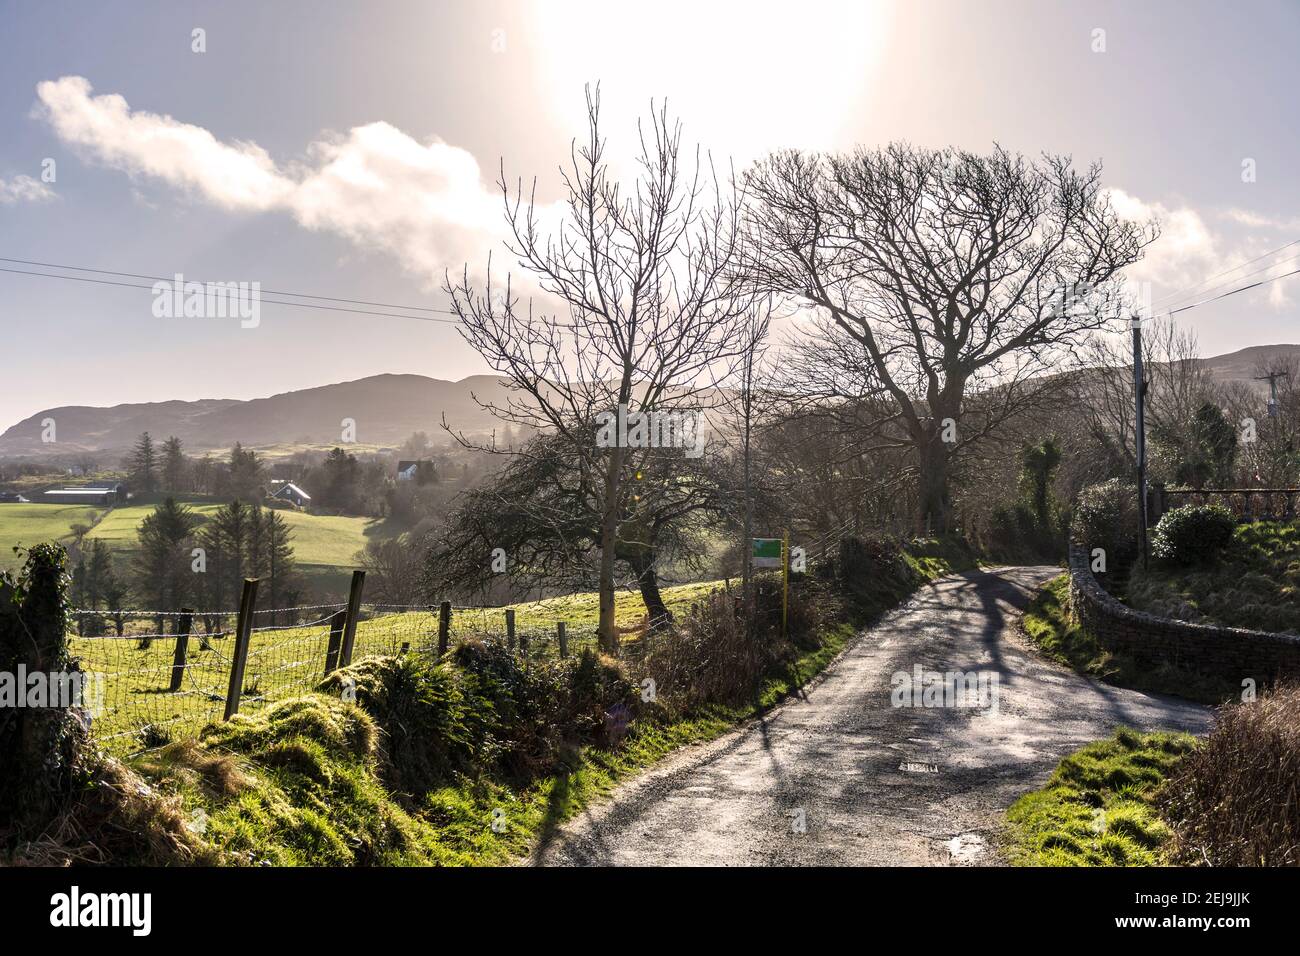 Rural countryside Gaeltacht land and lane road in County Donegal, Ireland Stock Photo